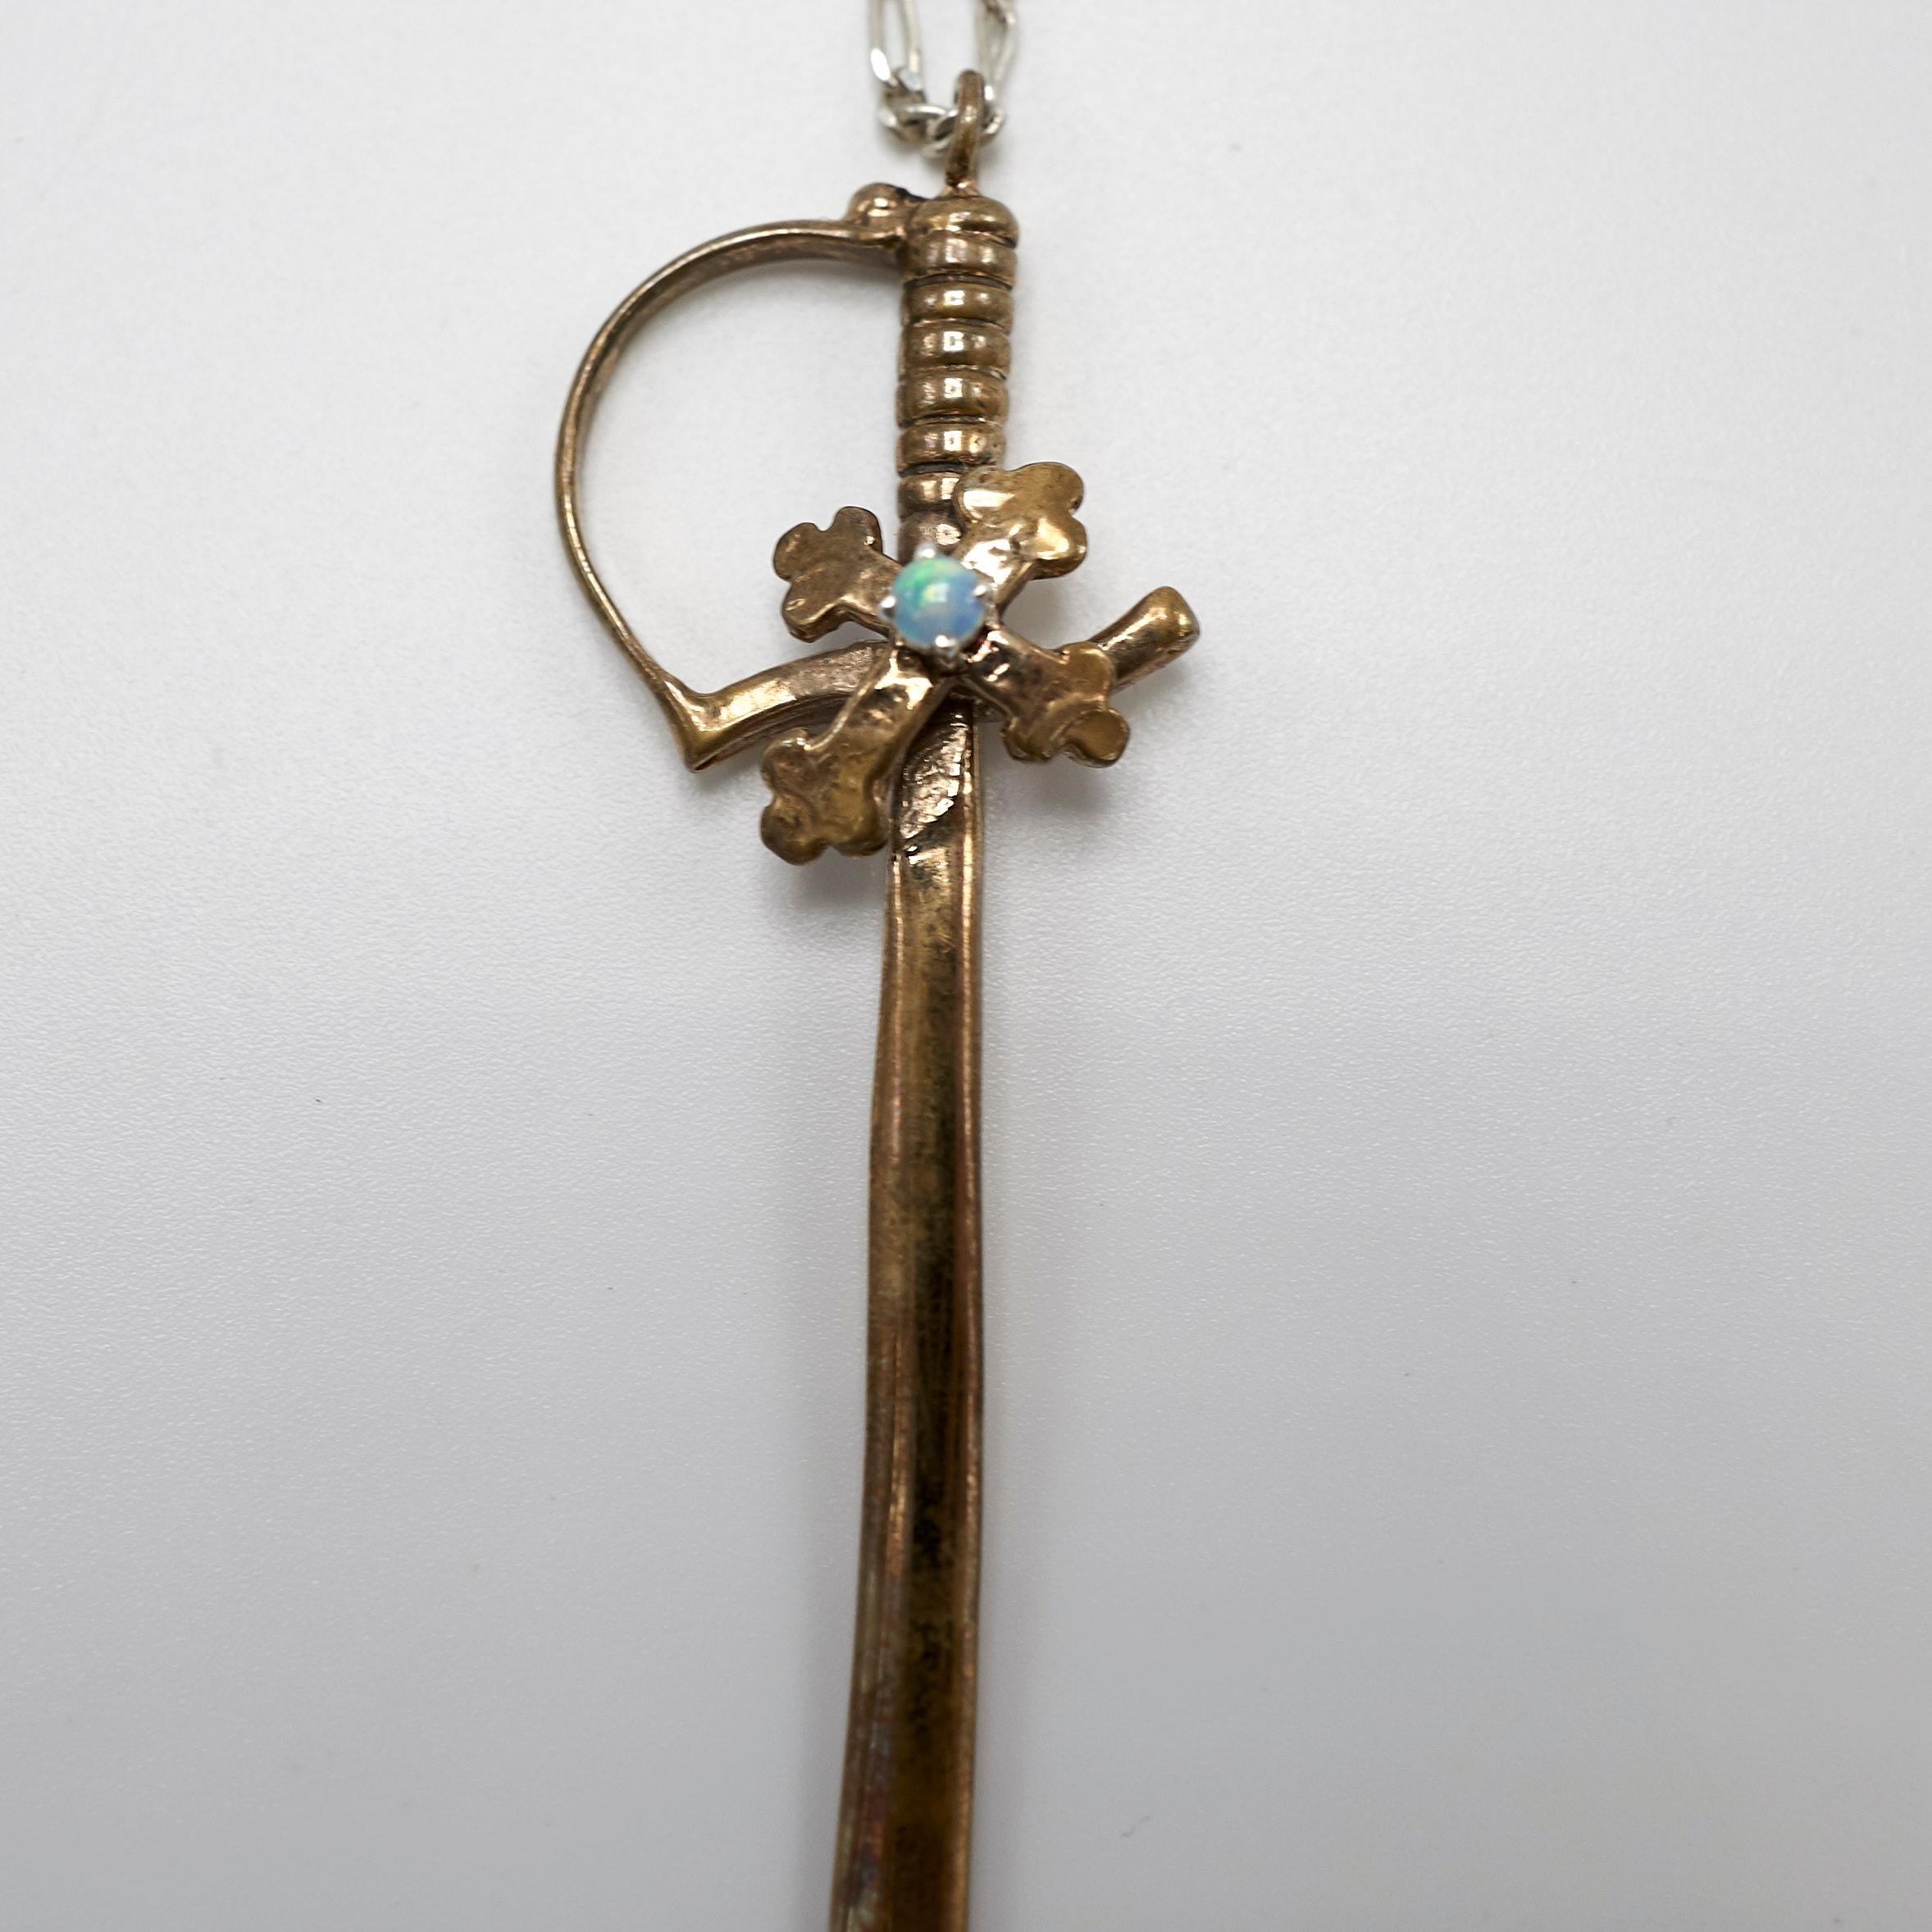 Opal Sword  Bronze Gold Filled Chain Necklace J Dauphin

Hand made in Los Angeles

3-4 weeks to be completed, made to order